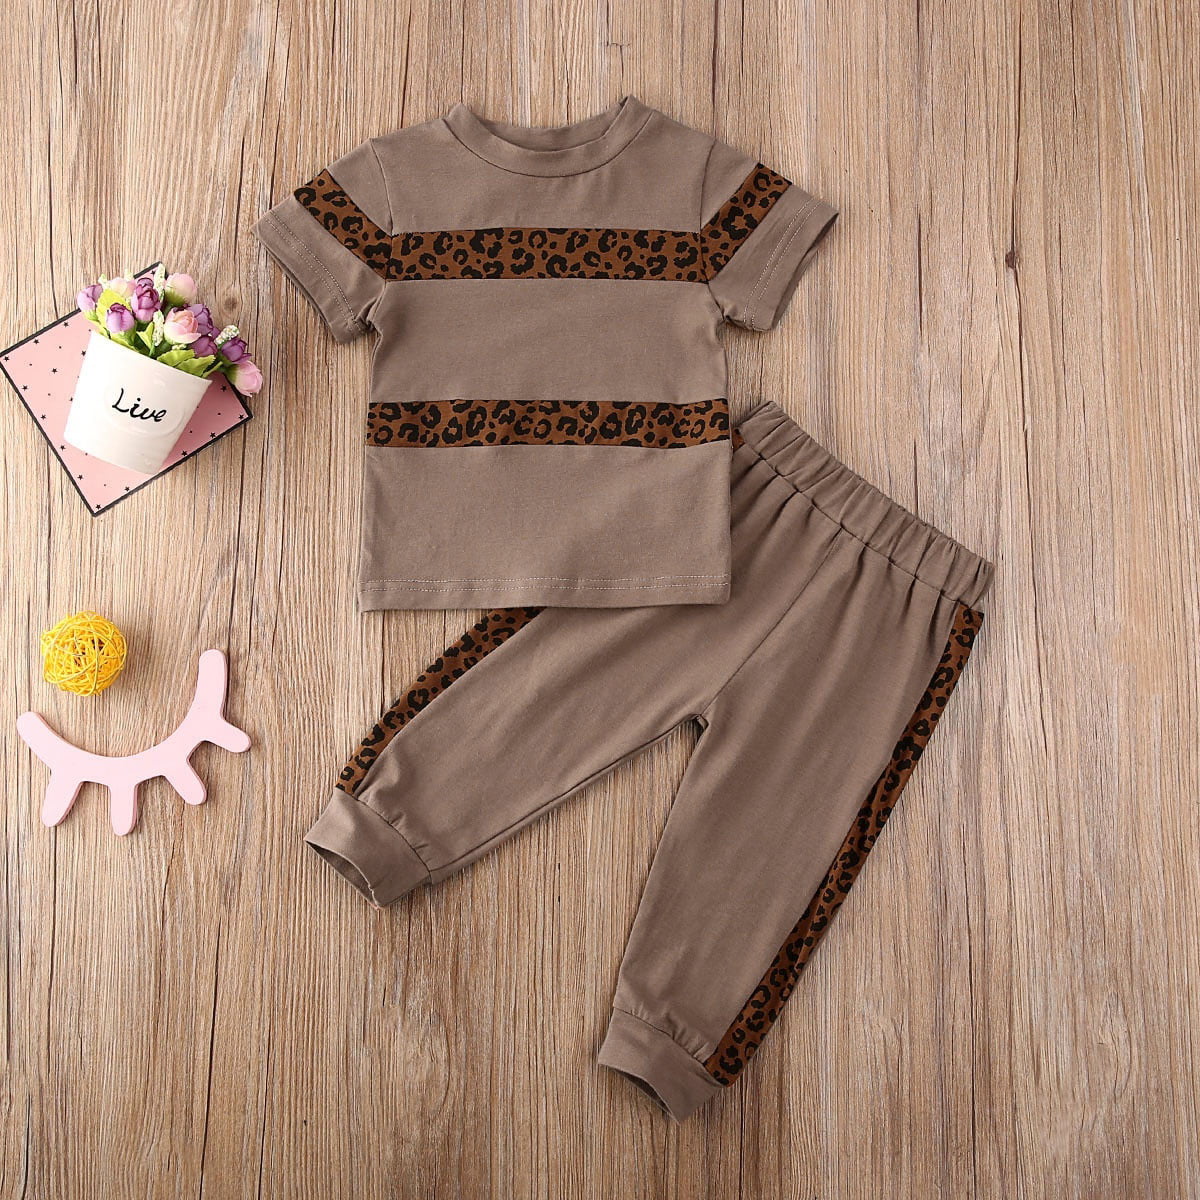 Toddler Kid Baby Girl Infant Clothes T-shirt Top Pants Outfit 2PCS Set Tracksuit